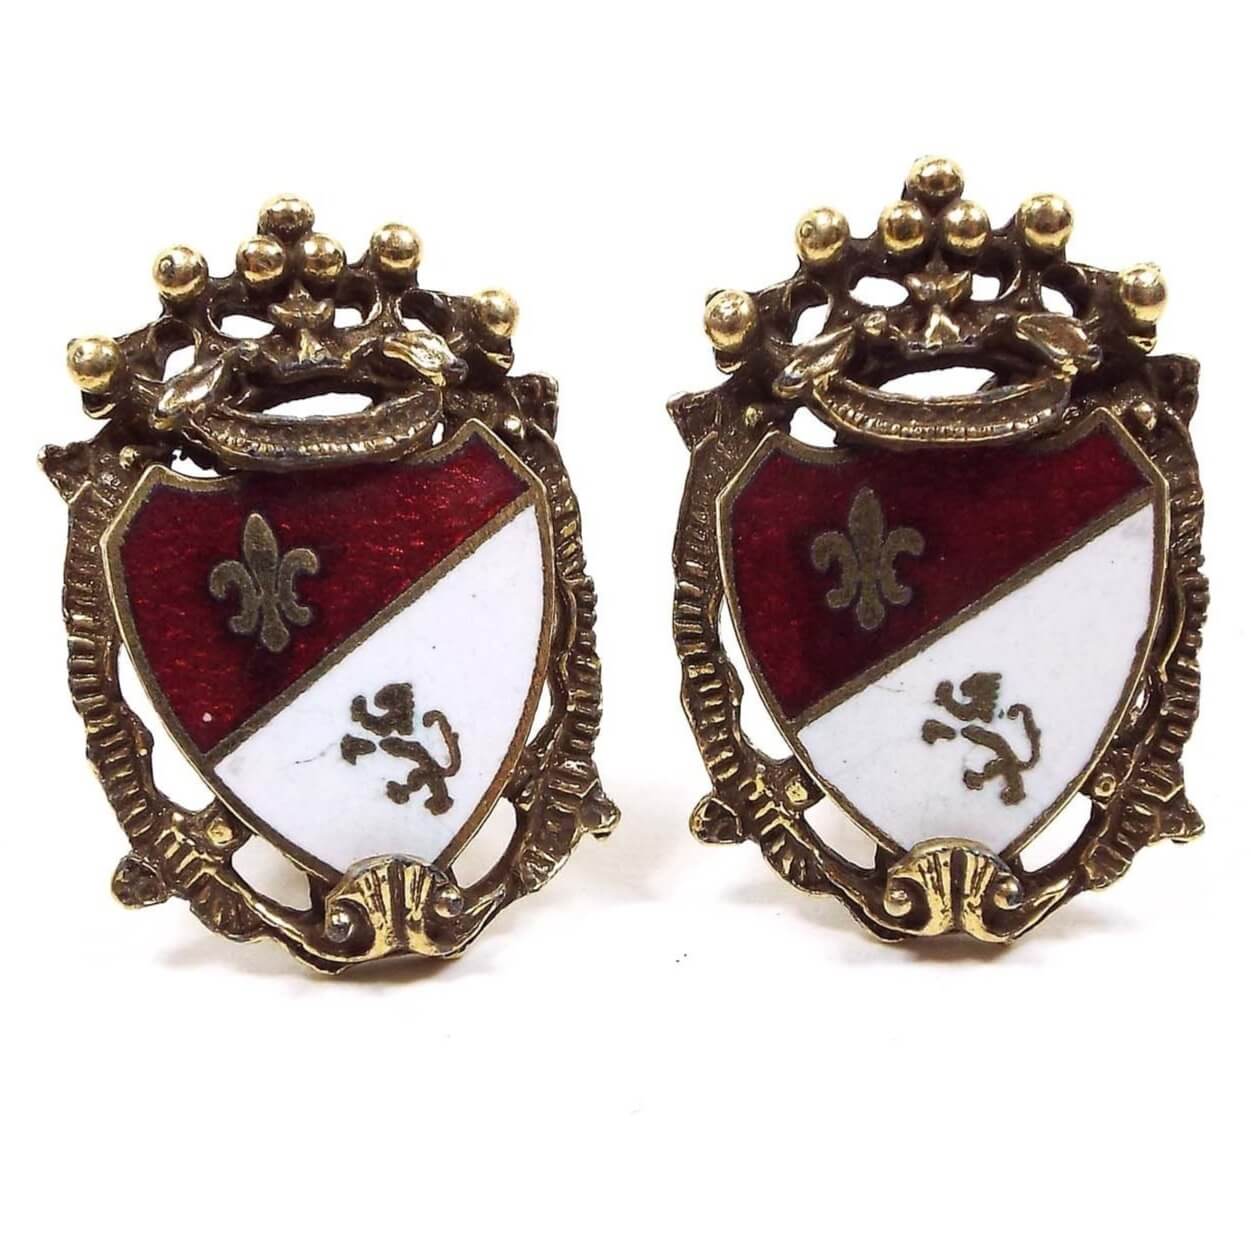 Front view of the Mid Century vintage Coro Heraldic shield clip on earrings. They are antiqued gold tone in color with red and white enamel. There is a fleur de lis and a lion on the front. 